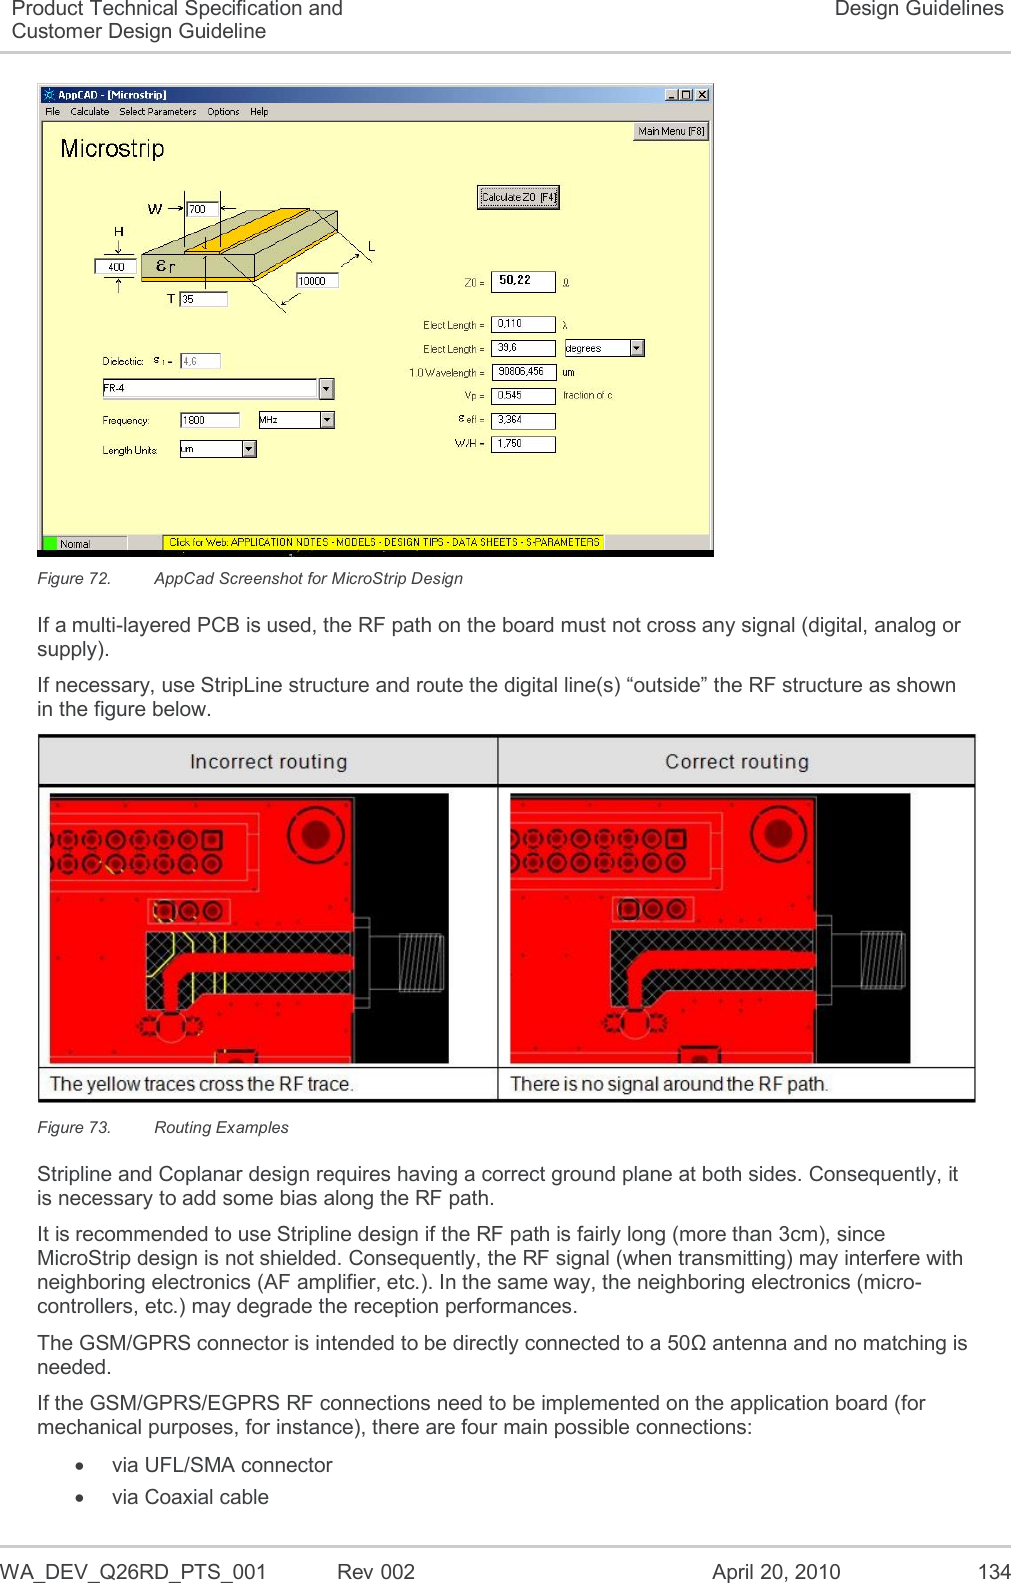   WA_DEV_Q26RD_PTS_001  Rev 002  April 20, 2010 134 Product Technical Specification and Customer Design Guideline Design Guidelines  Figure 72.  AppCad Screenshot for MicroStrip Design If a multi-layered PCB is used, the RF path on the board must not cross any signal (digital, analog or supply). If necessary, use StripLine structure and route the digital line(s) “outside” the RF structure as shown in the figure below.  Figure 73.  Routing Examples Stripline and Coplanar design requires having a correct ground plane at both sides. Consequently, it is necessary to add some bias along the RF path. It is recommended to use Stripline design if the RF path is fairly long (more than 3cm), since MicroStrip design is not shielded. Consequently, the RF signal (when transmitting) may interfere with neighboring electronics (AF amplifier, etc.). In the same way, the neighboring electronics (micro-controllers, etc.) may degrade the reception performances. The GSM/GPRS connector is intended to be directly connected to a 50Ω antenna and no matching is needed. If the GSM/GPRS/EGPRS RF connections need to be implemented on the application board (for mechanical purposes, for instance), there are four main possible connections:   via UFL/SMA connector   via Coaxial cable 